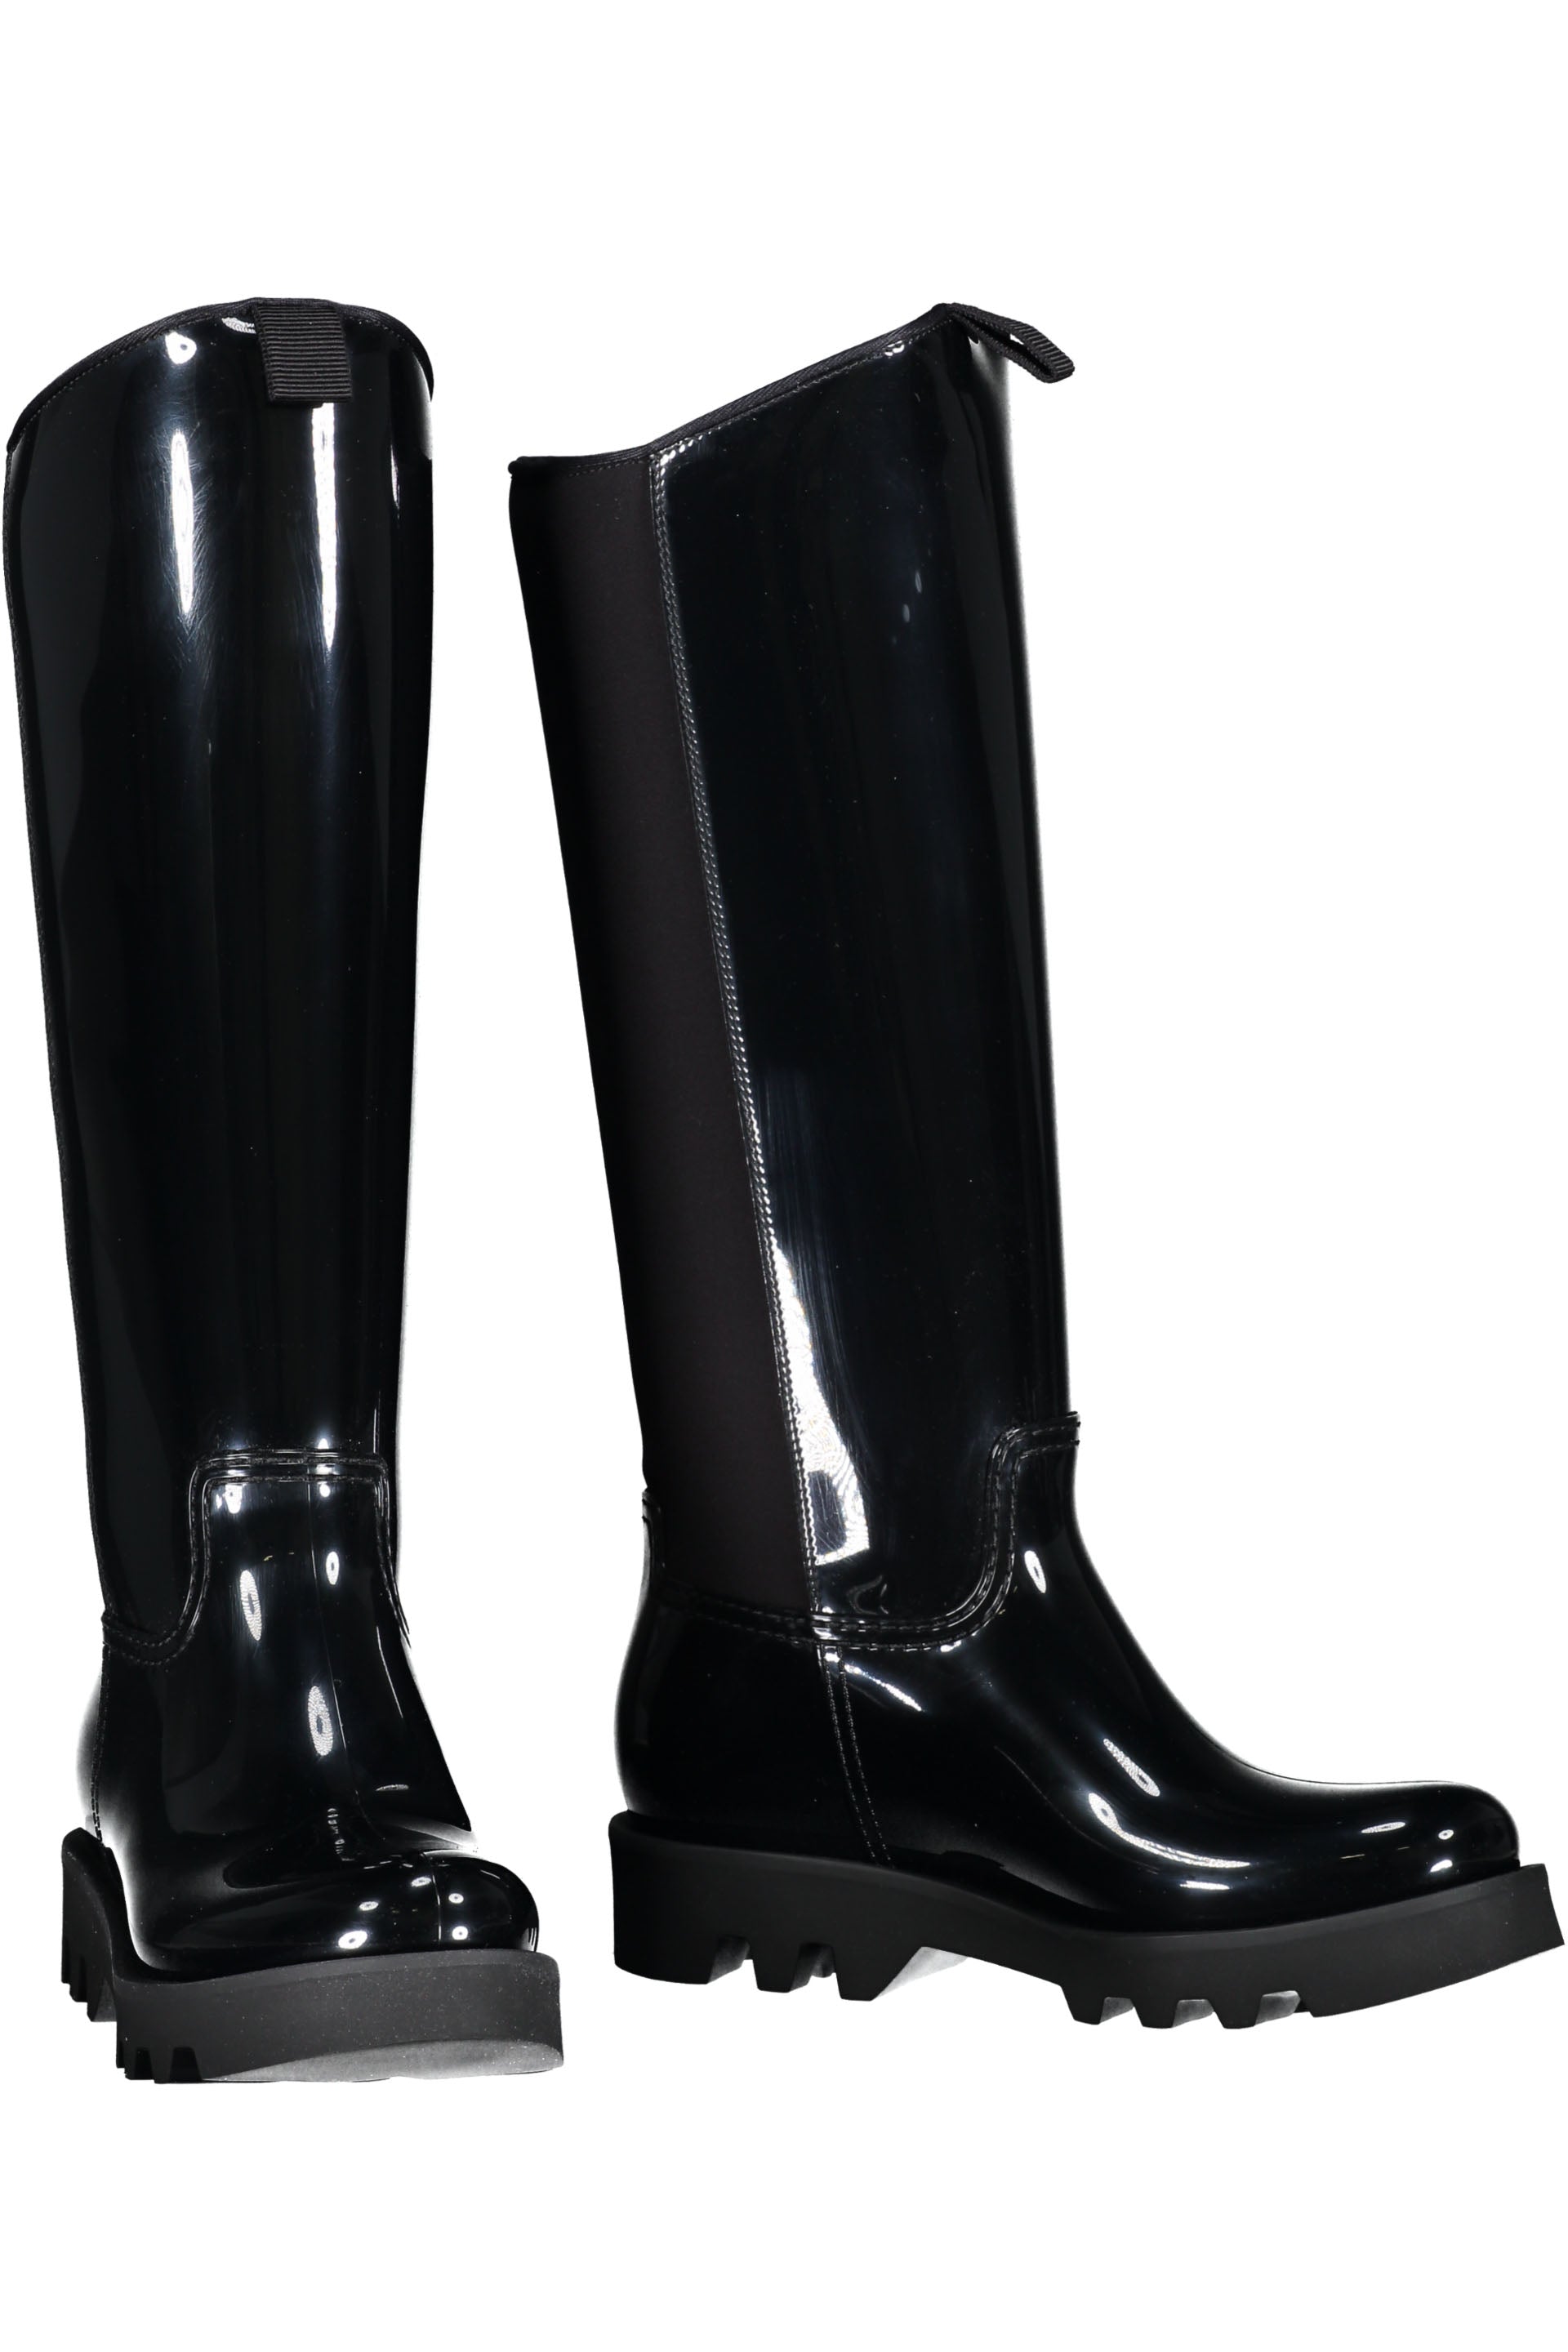 Moncler-OUTLET-SALE-Gilla-knee-boots-Stiefel-Stiefeletten-36-ARCHIVE-COLLECTION-3.jpg